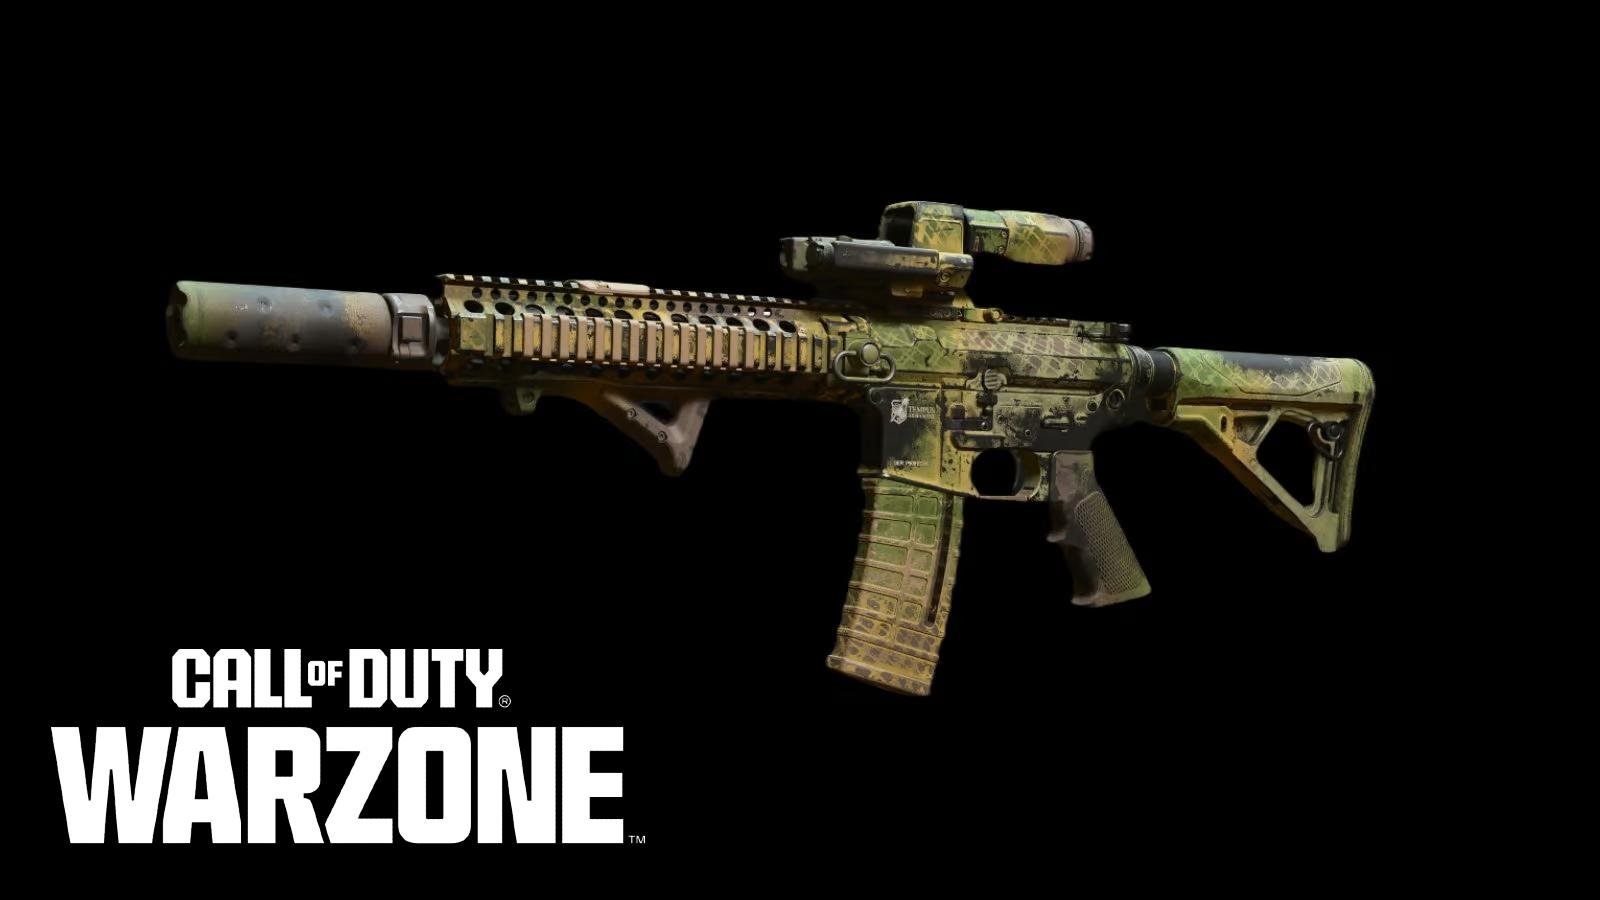 Best Warzone 2 loadouts — Best meta loadouts, weapons, and classes